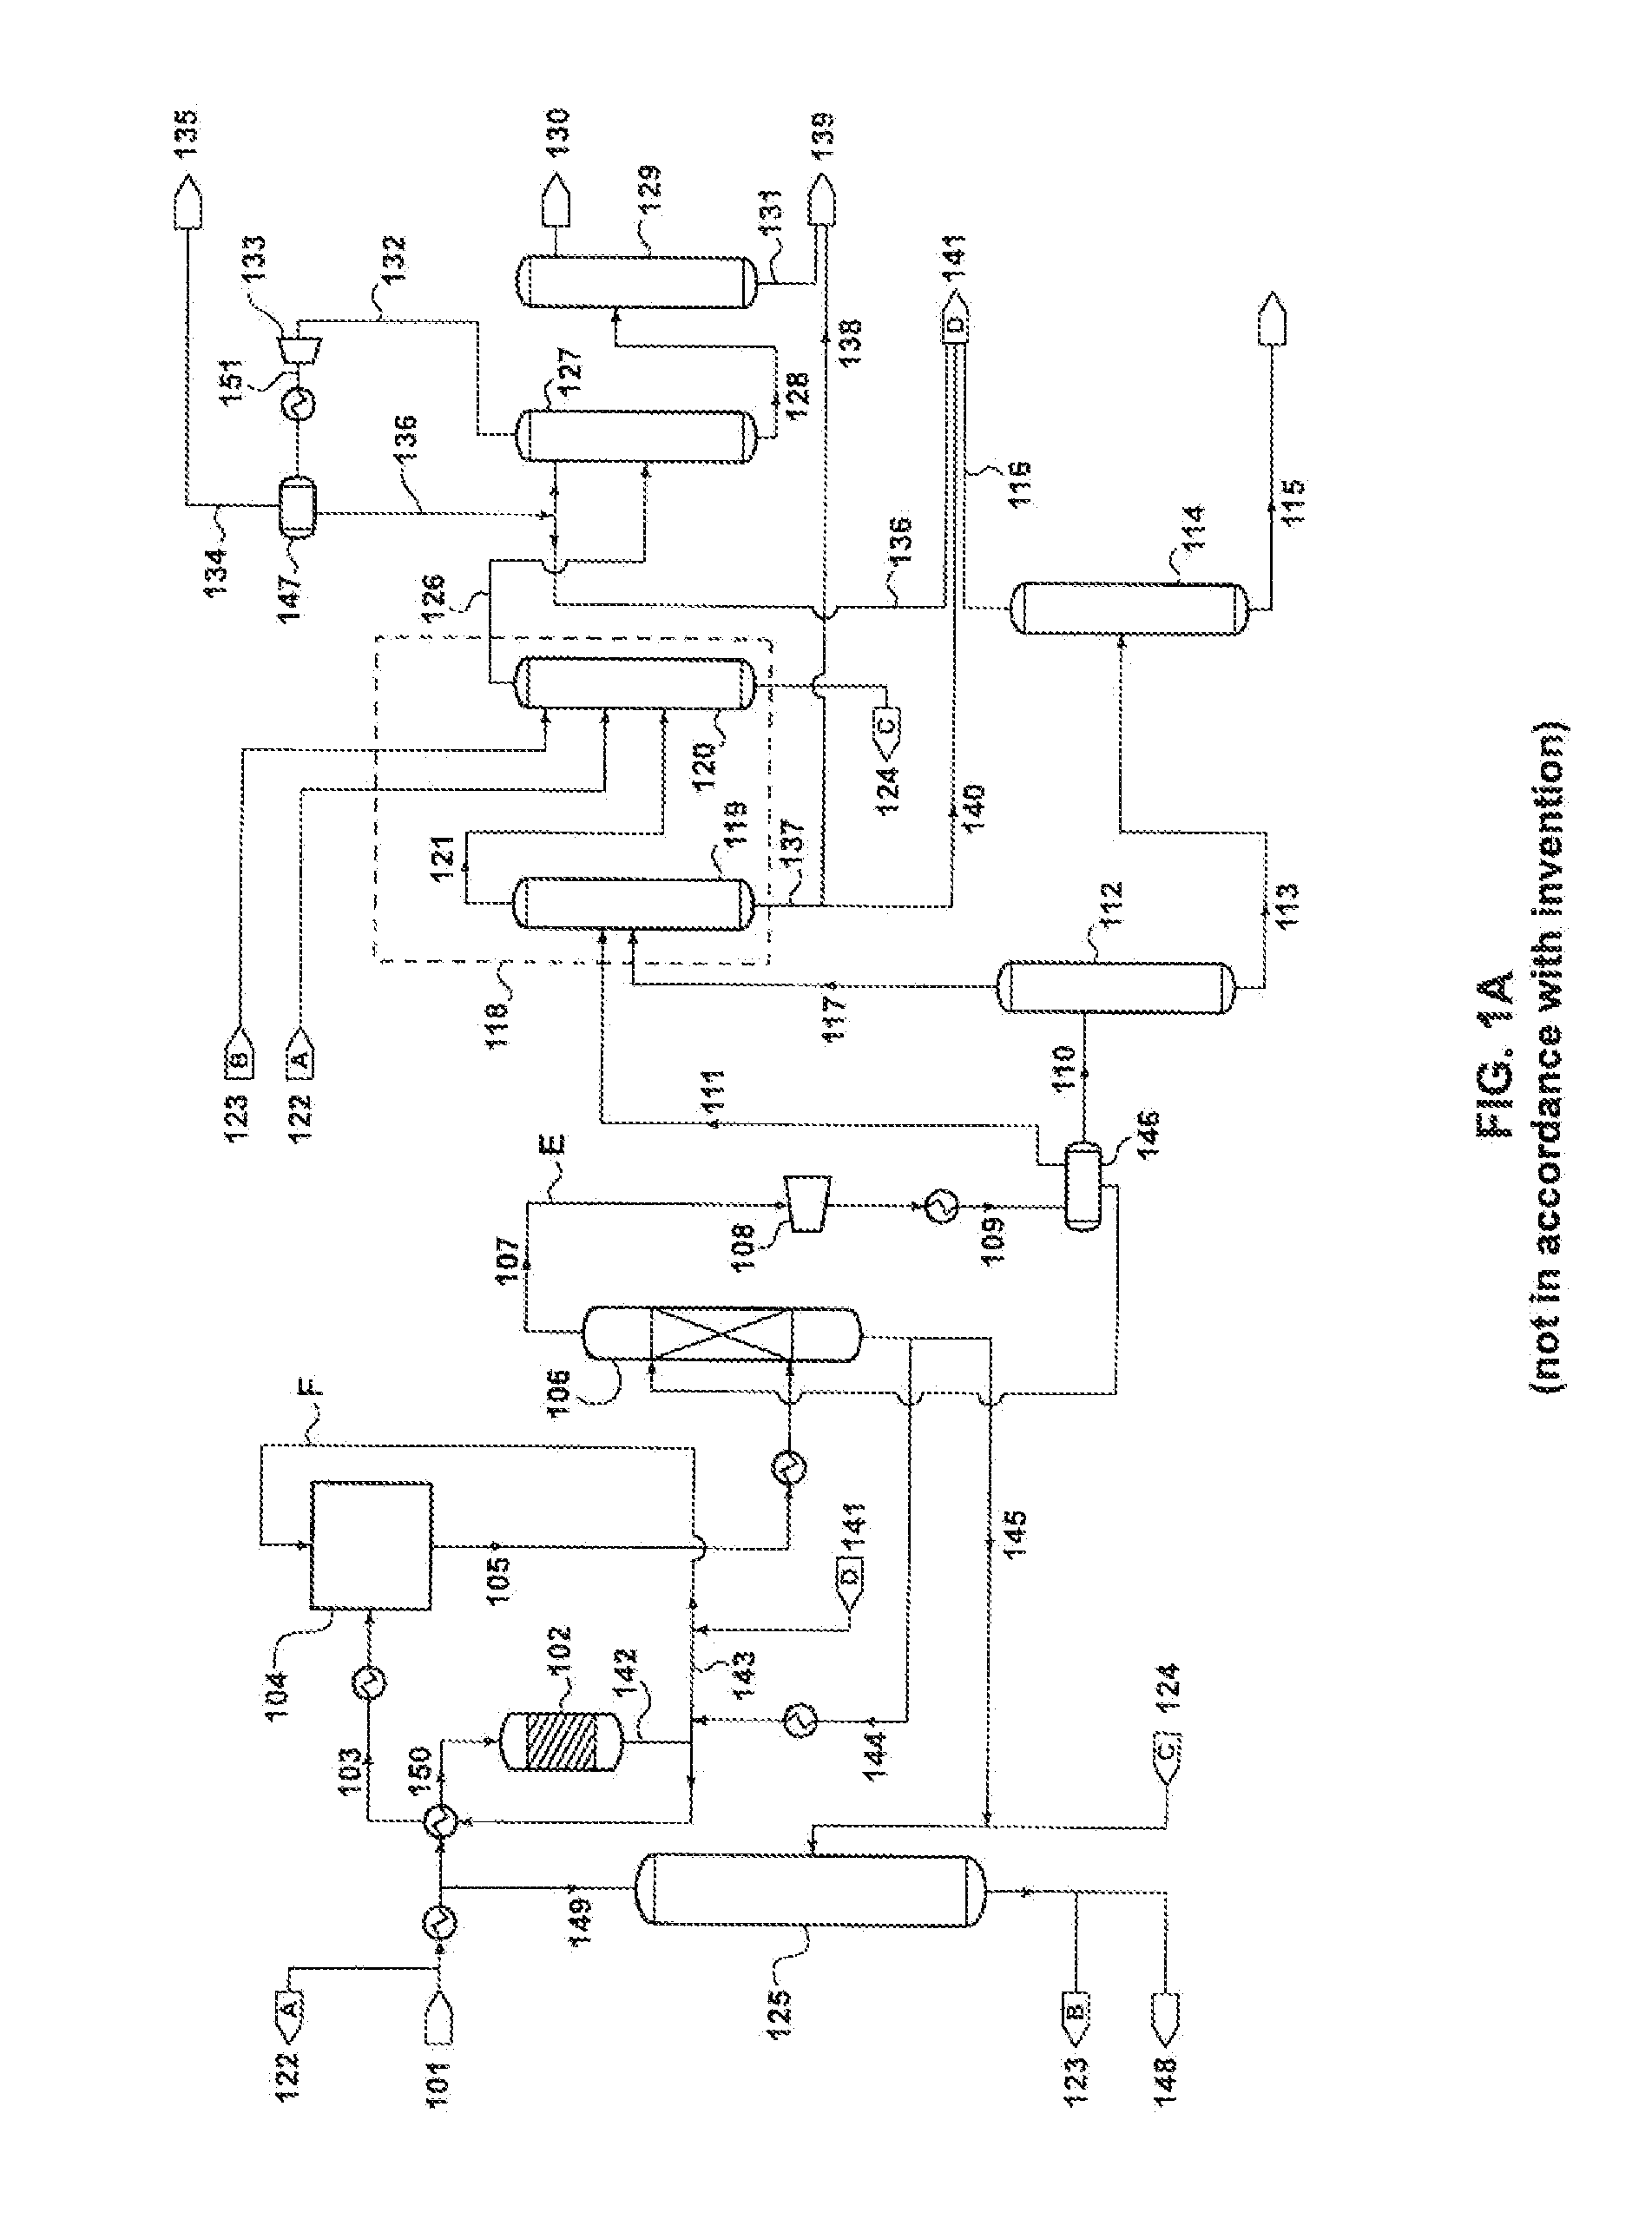 Membrane technology for use in a methanol-to-propylene conversion process